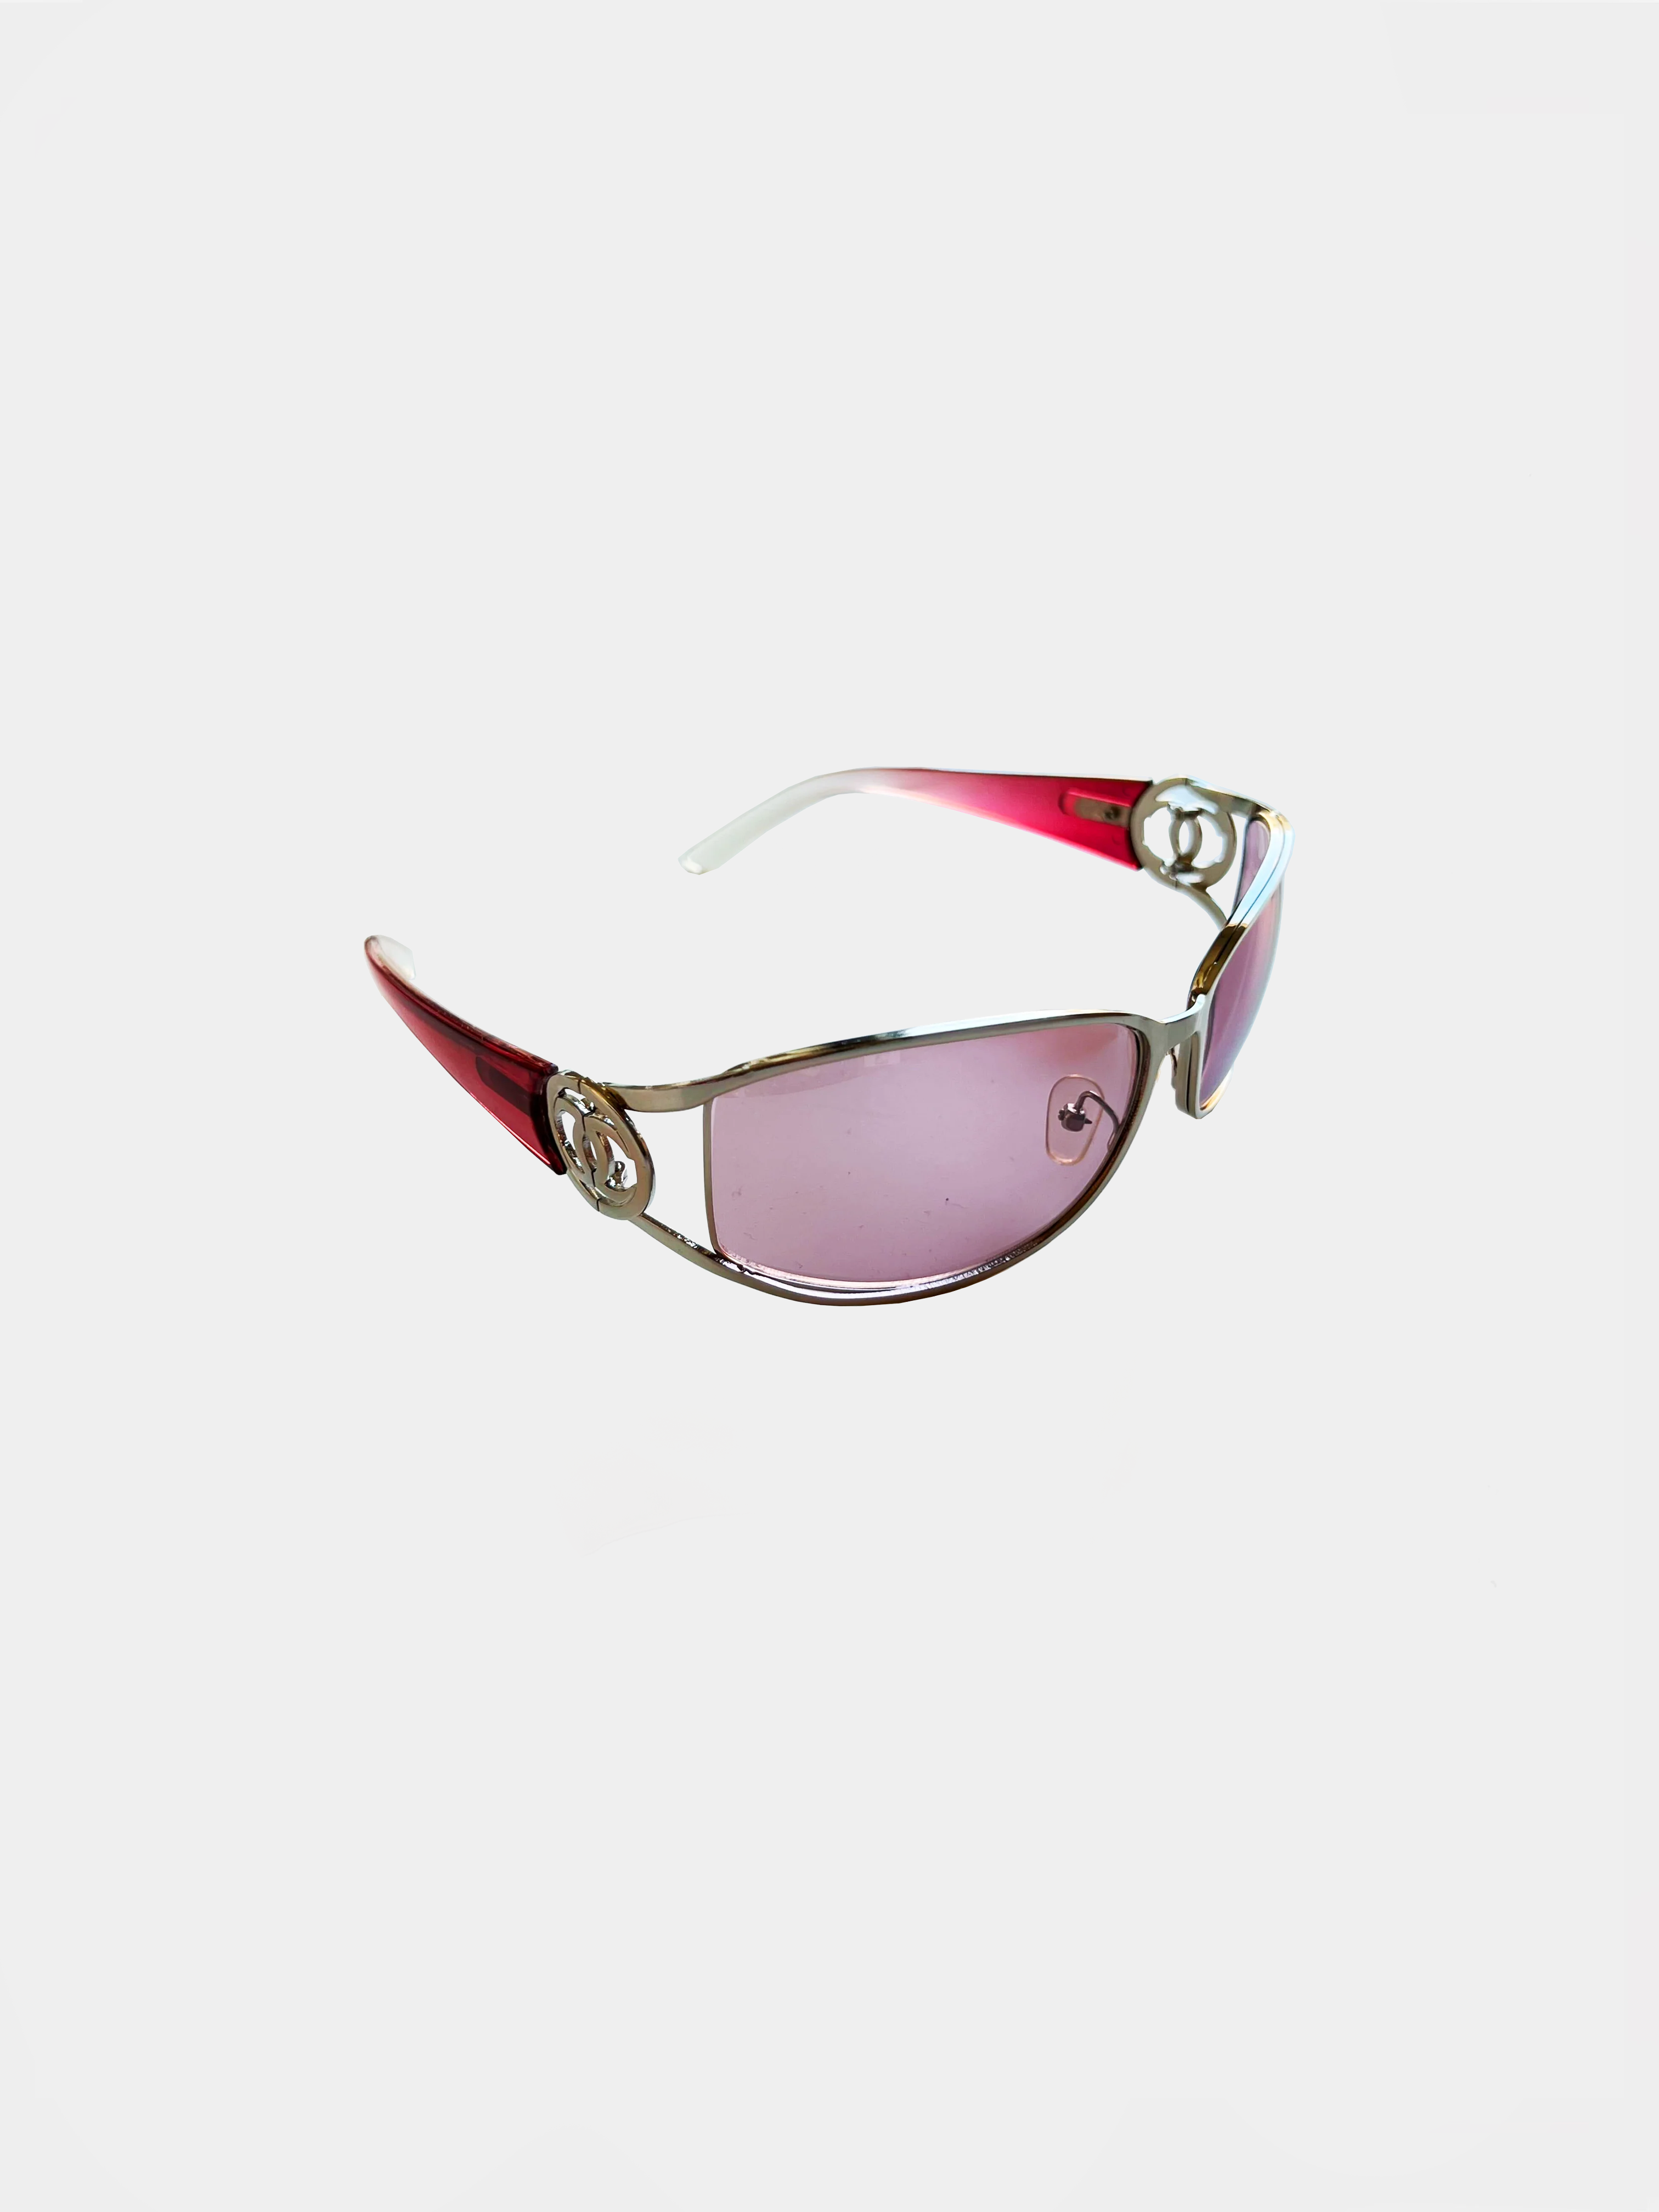 Chanel sunglasses with pink and gold square frames and pink lenses